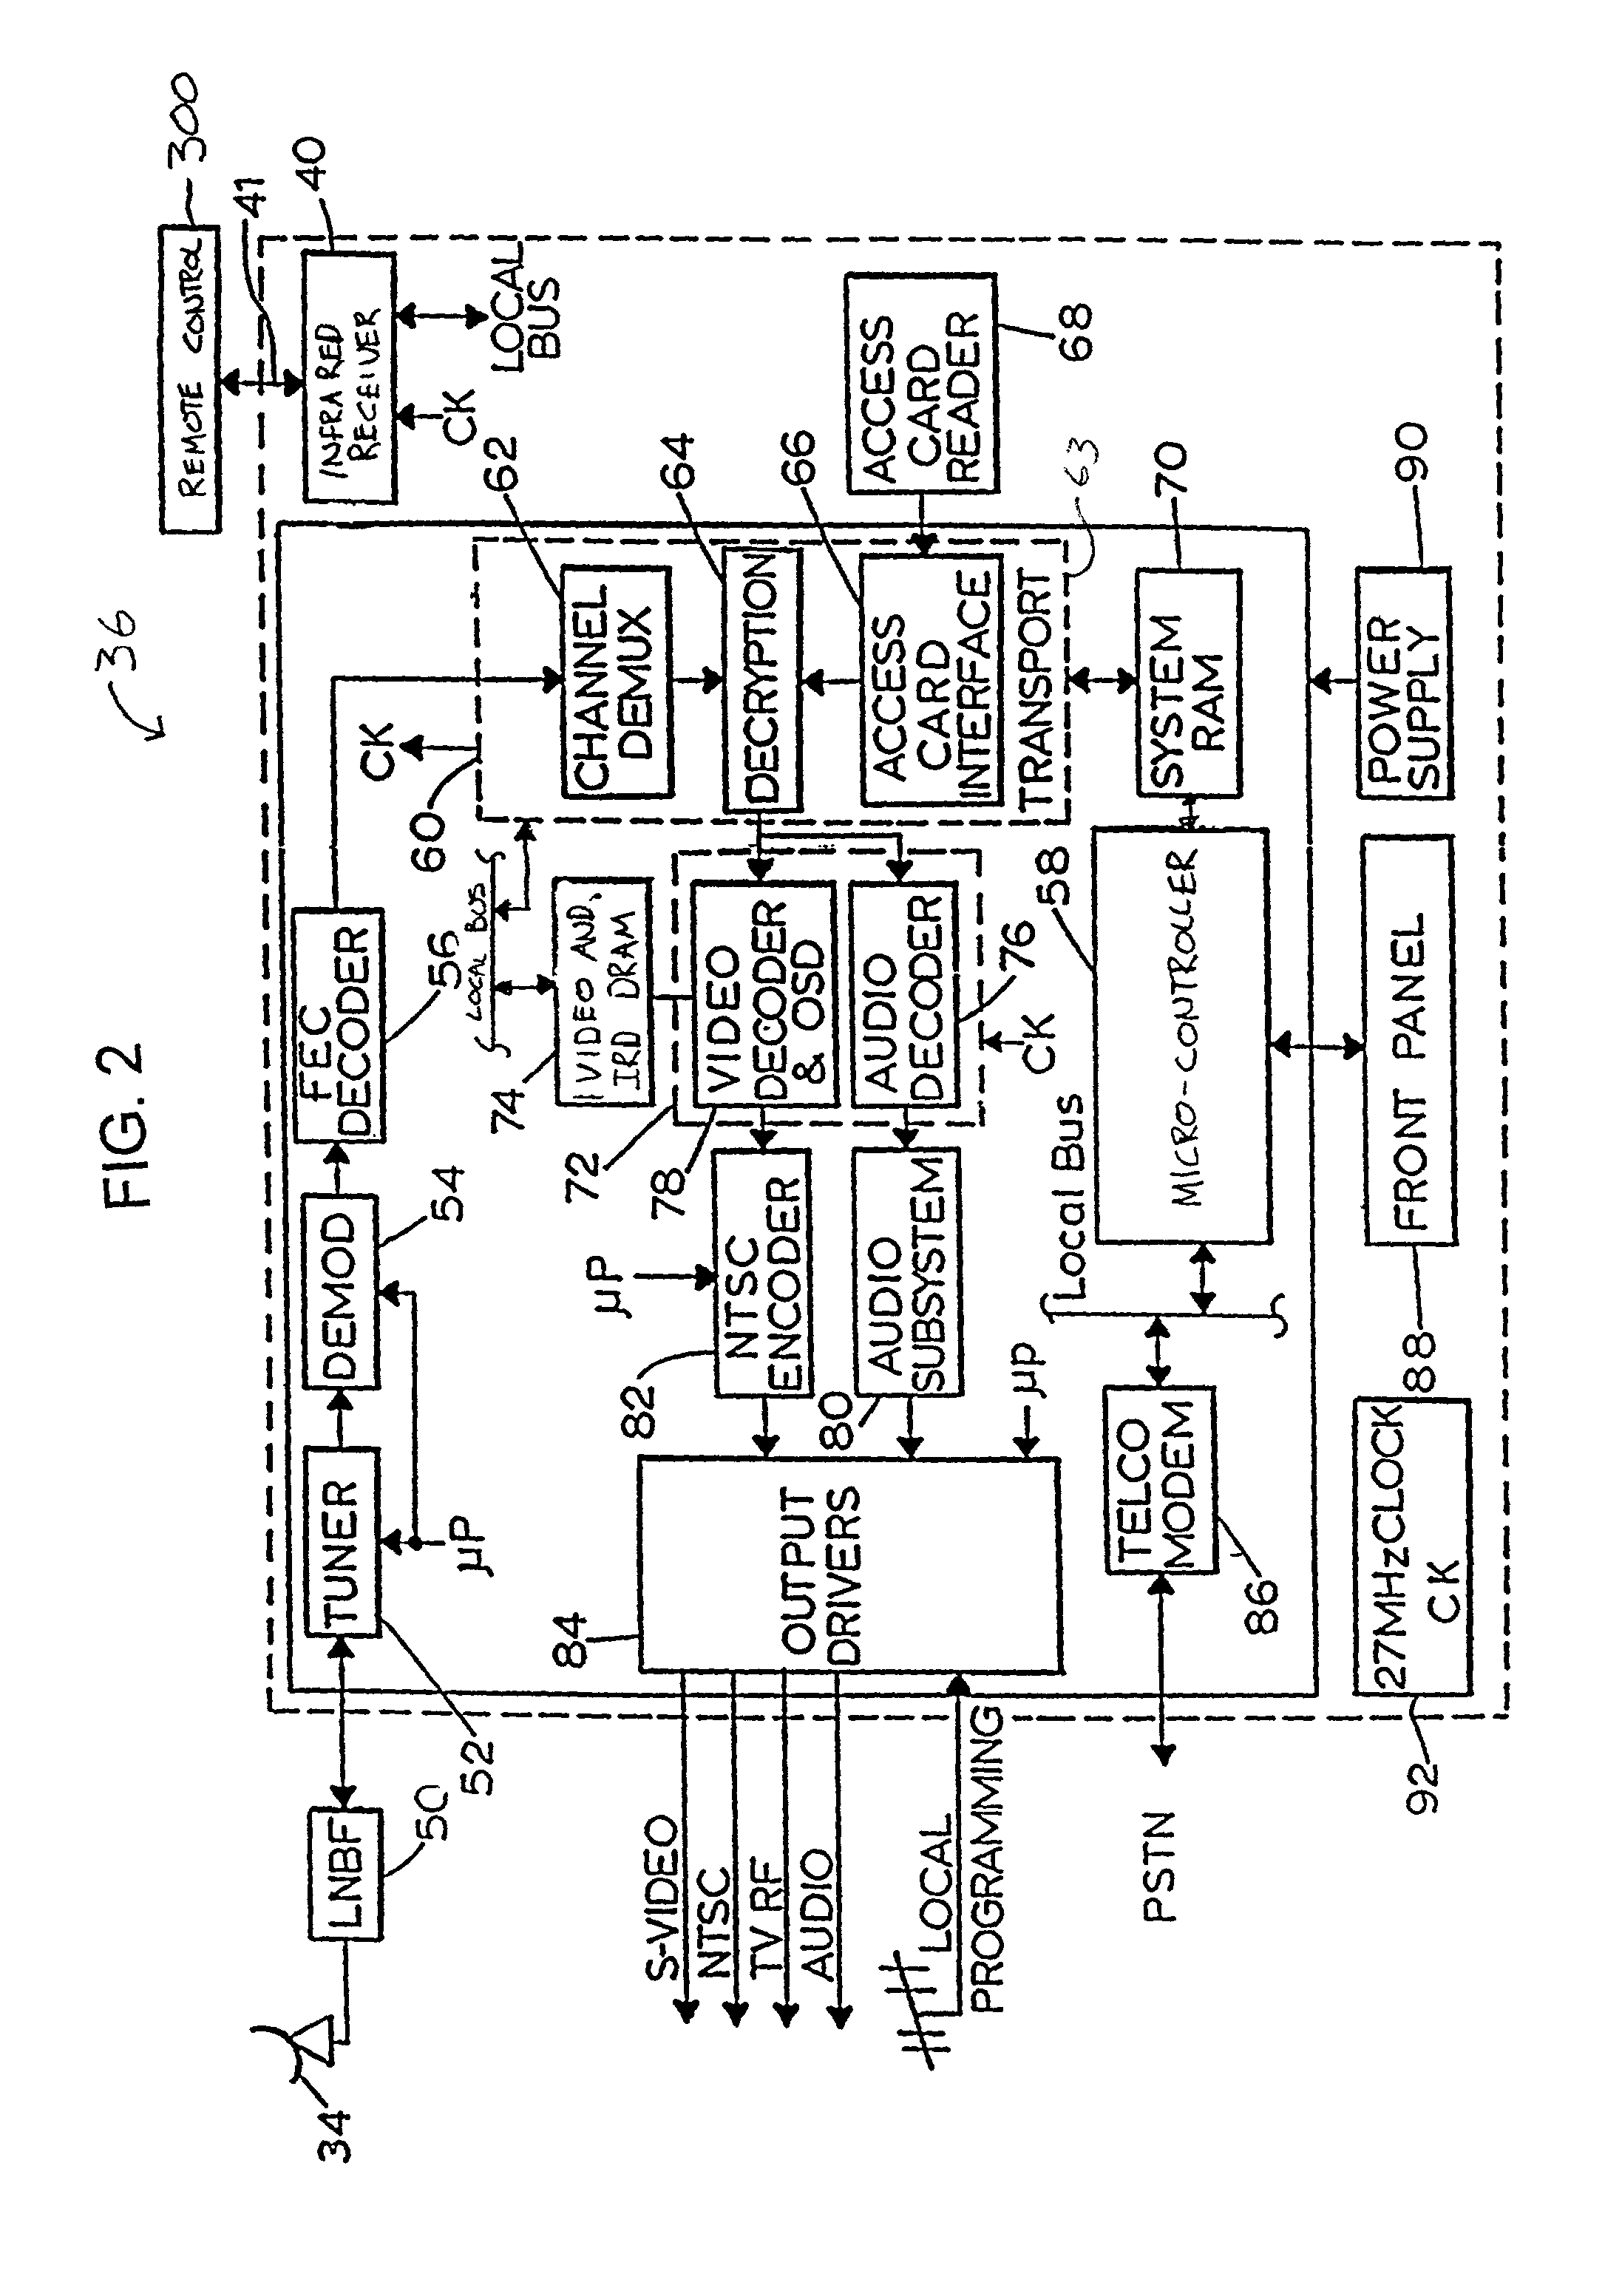 Method and apparatus for filtering data displayed in an electronic television program guide